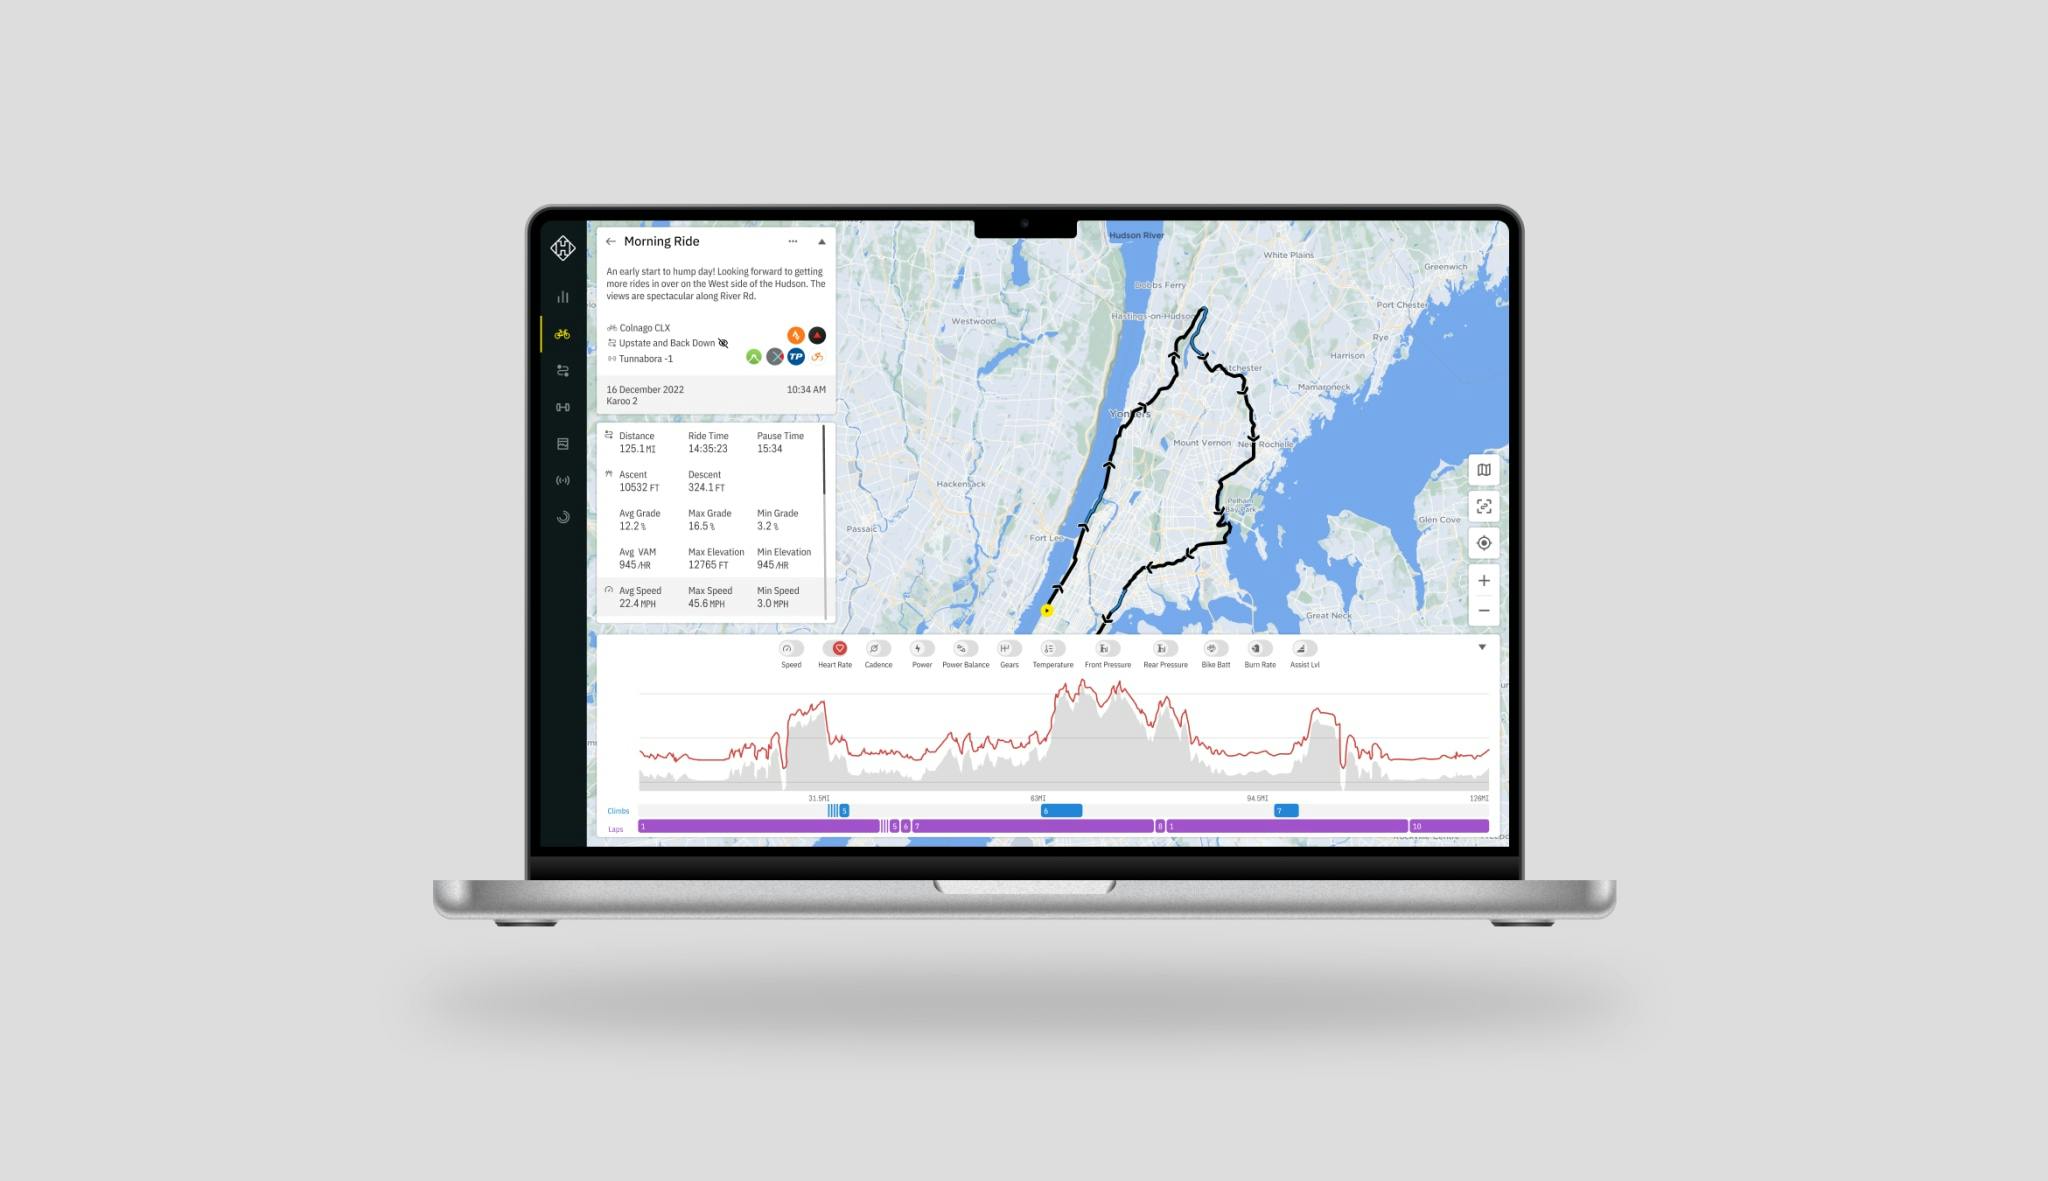 The dashboard ride analysis map page